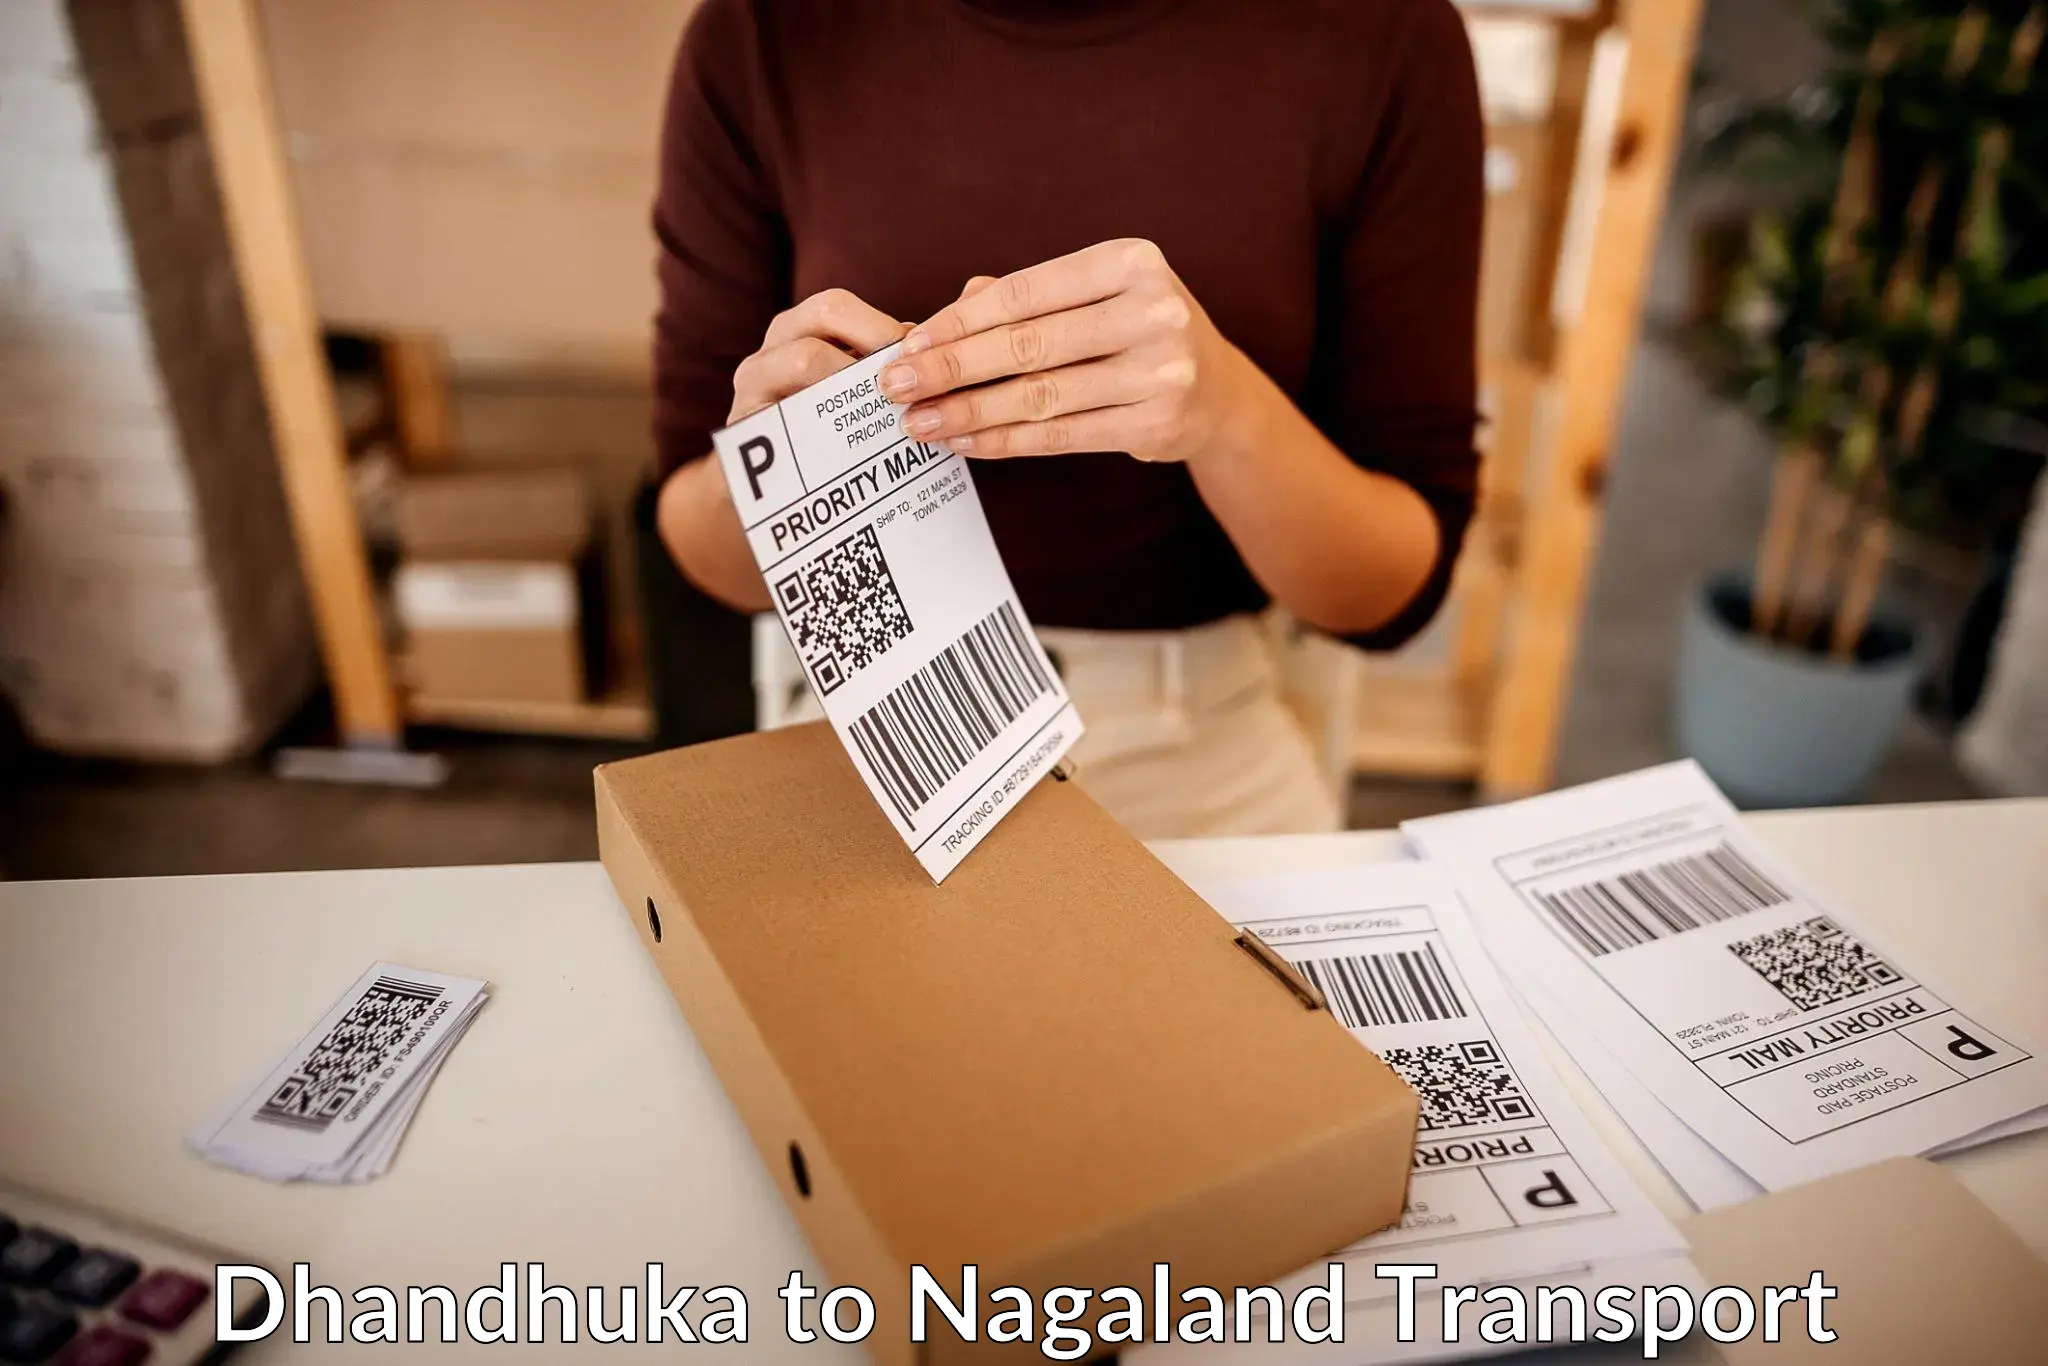 Goods delivery service Dhandhuka to NIT Nagaland